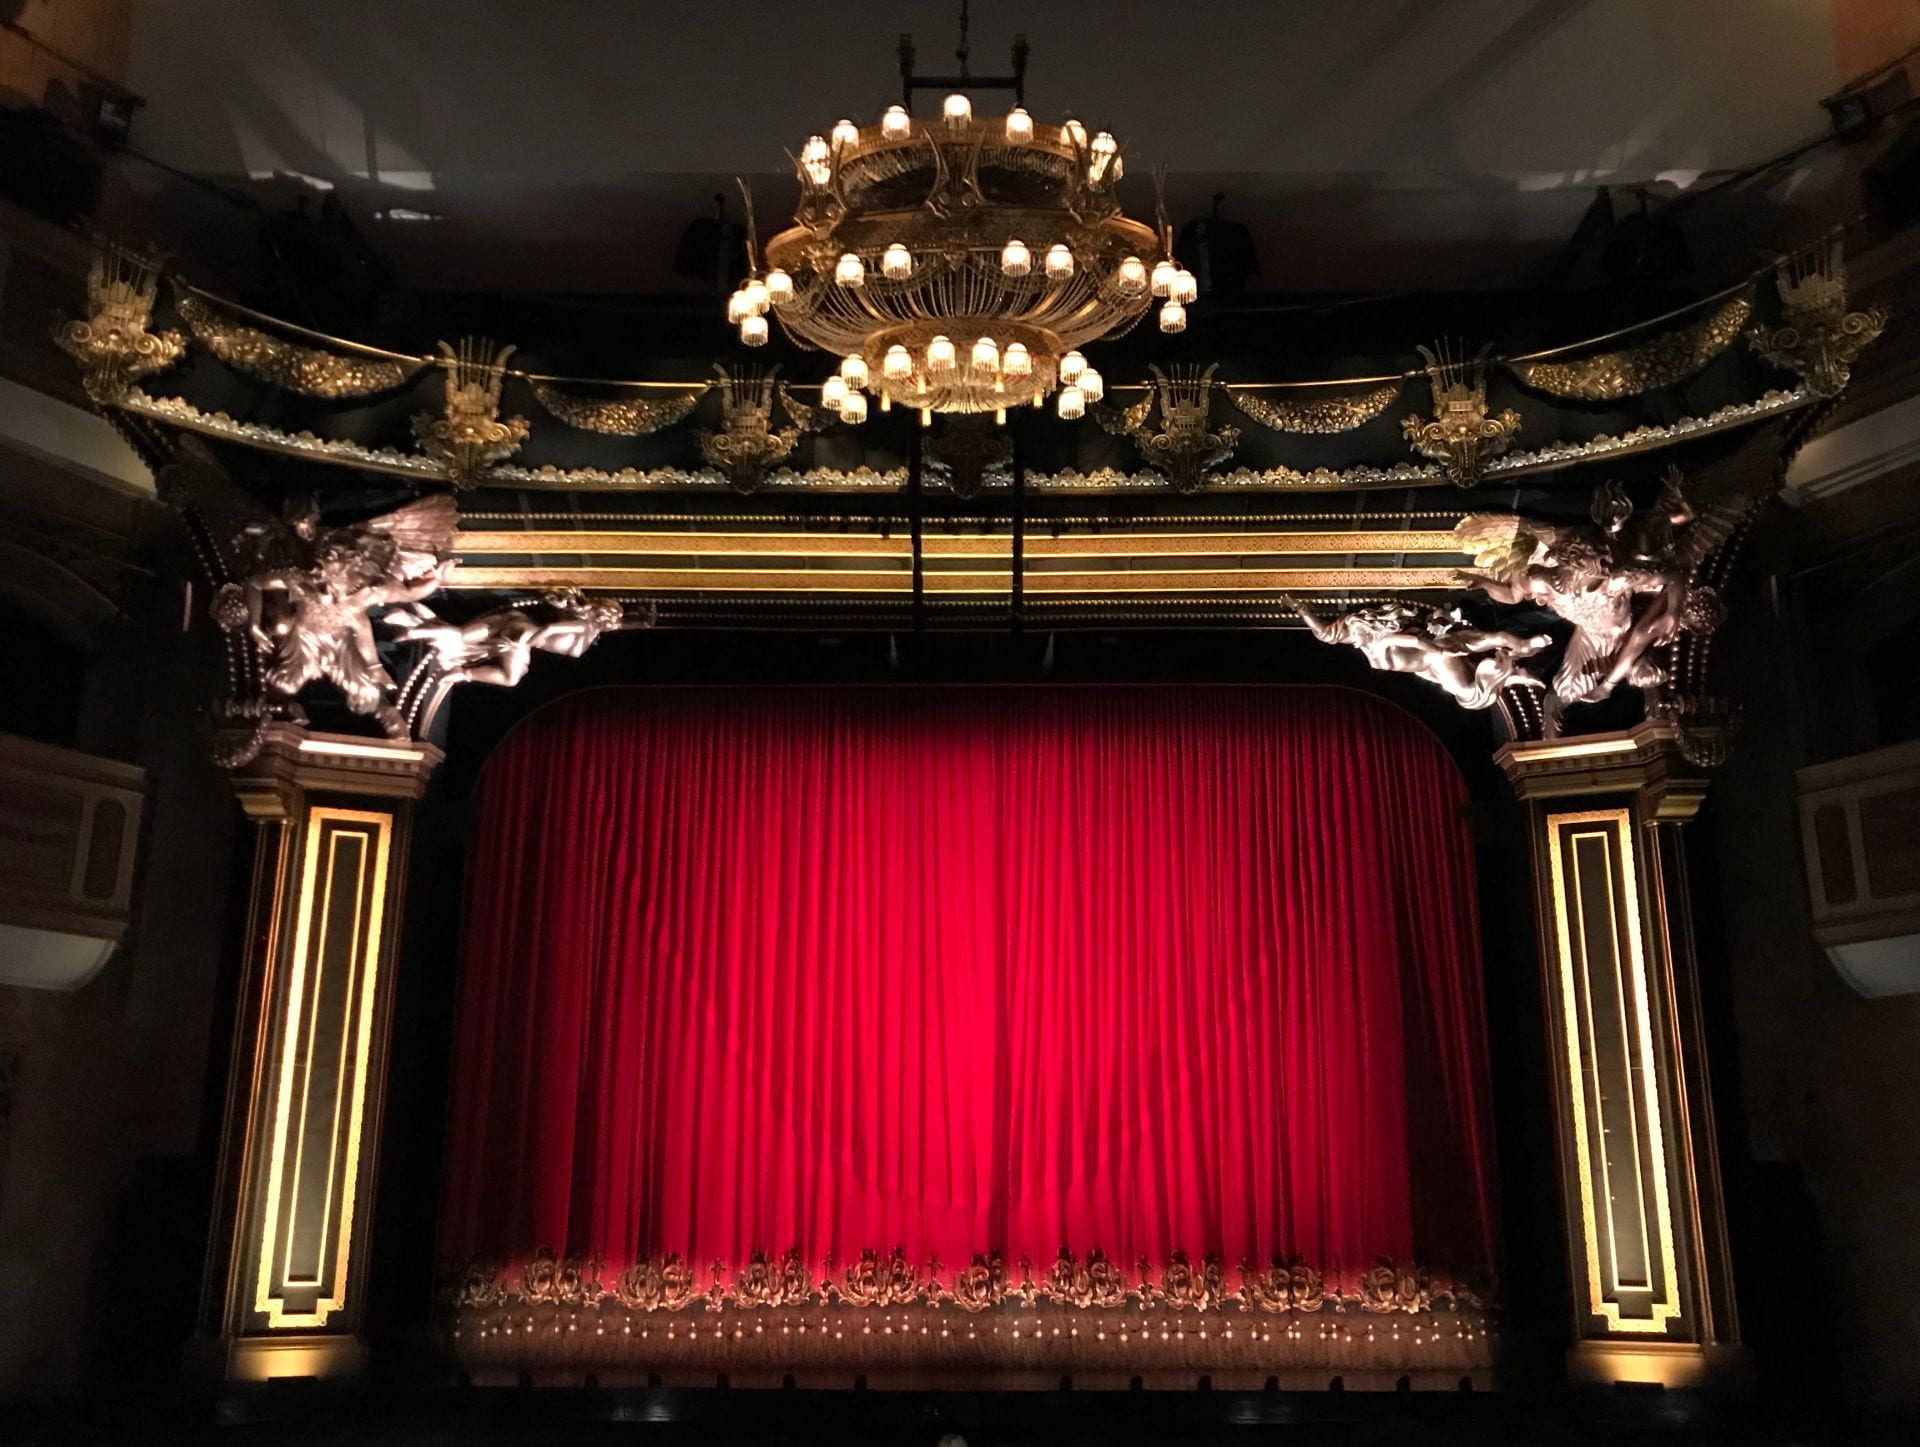 A photo depicting a theatre, with a red curtain closed across the stage.